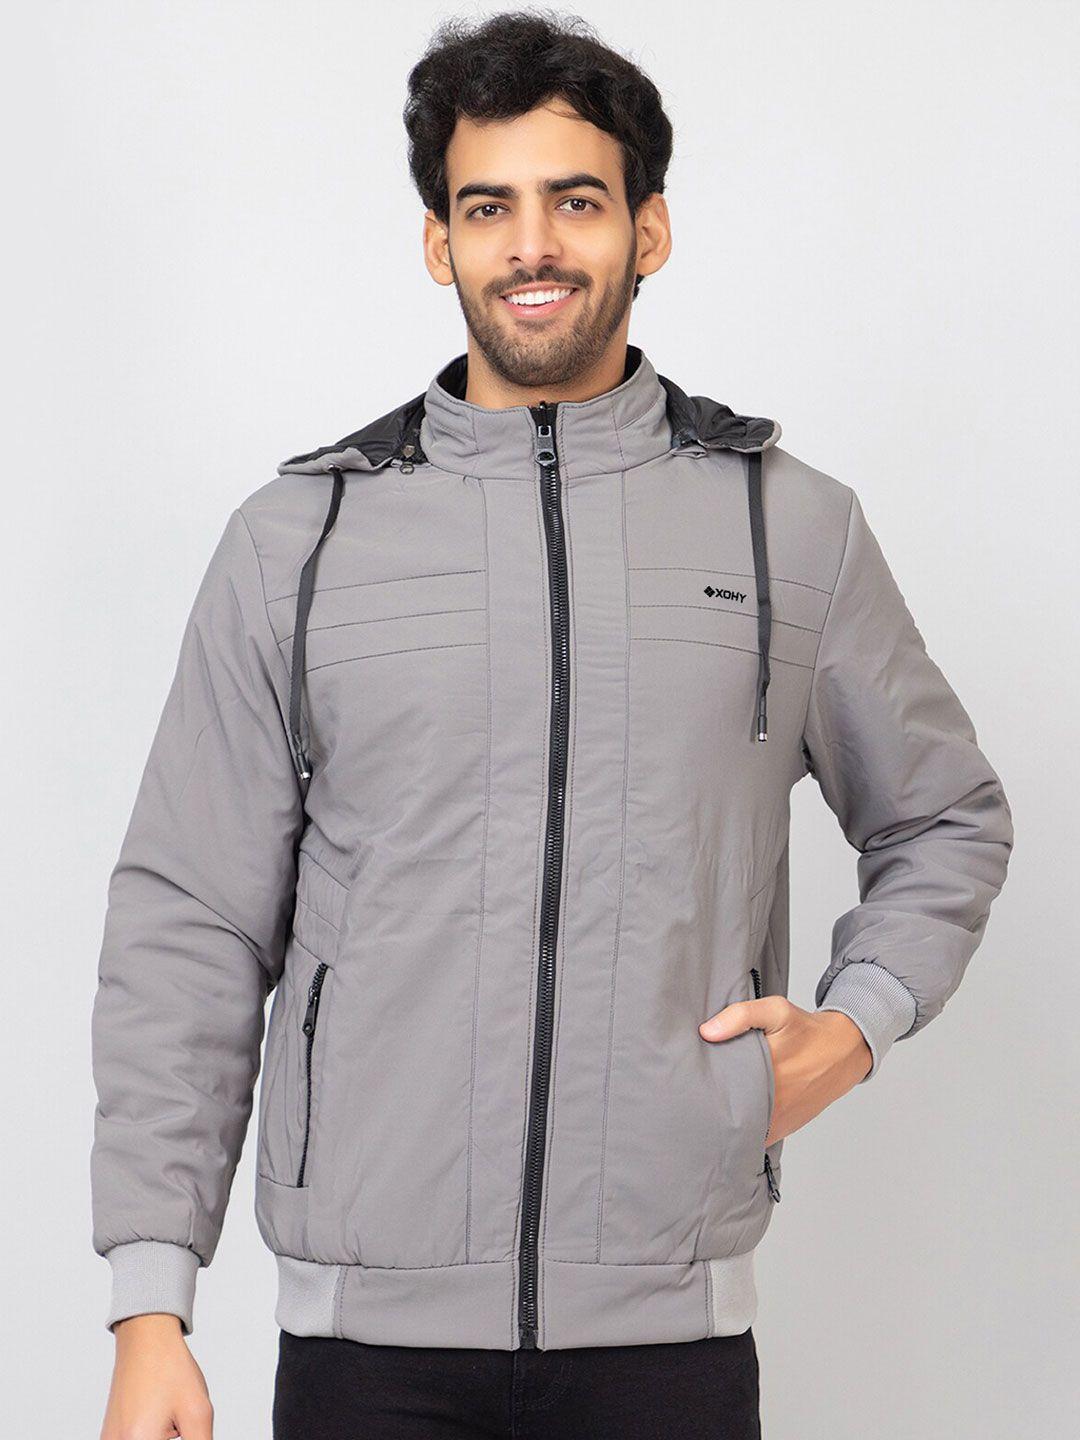 xohy hooded lightweight cotton bomber jacket